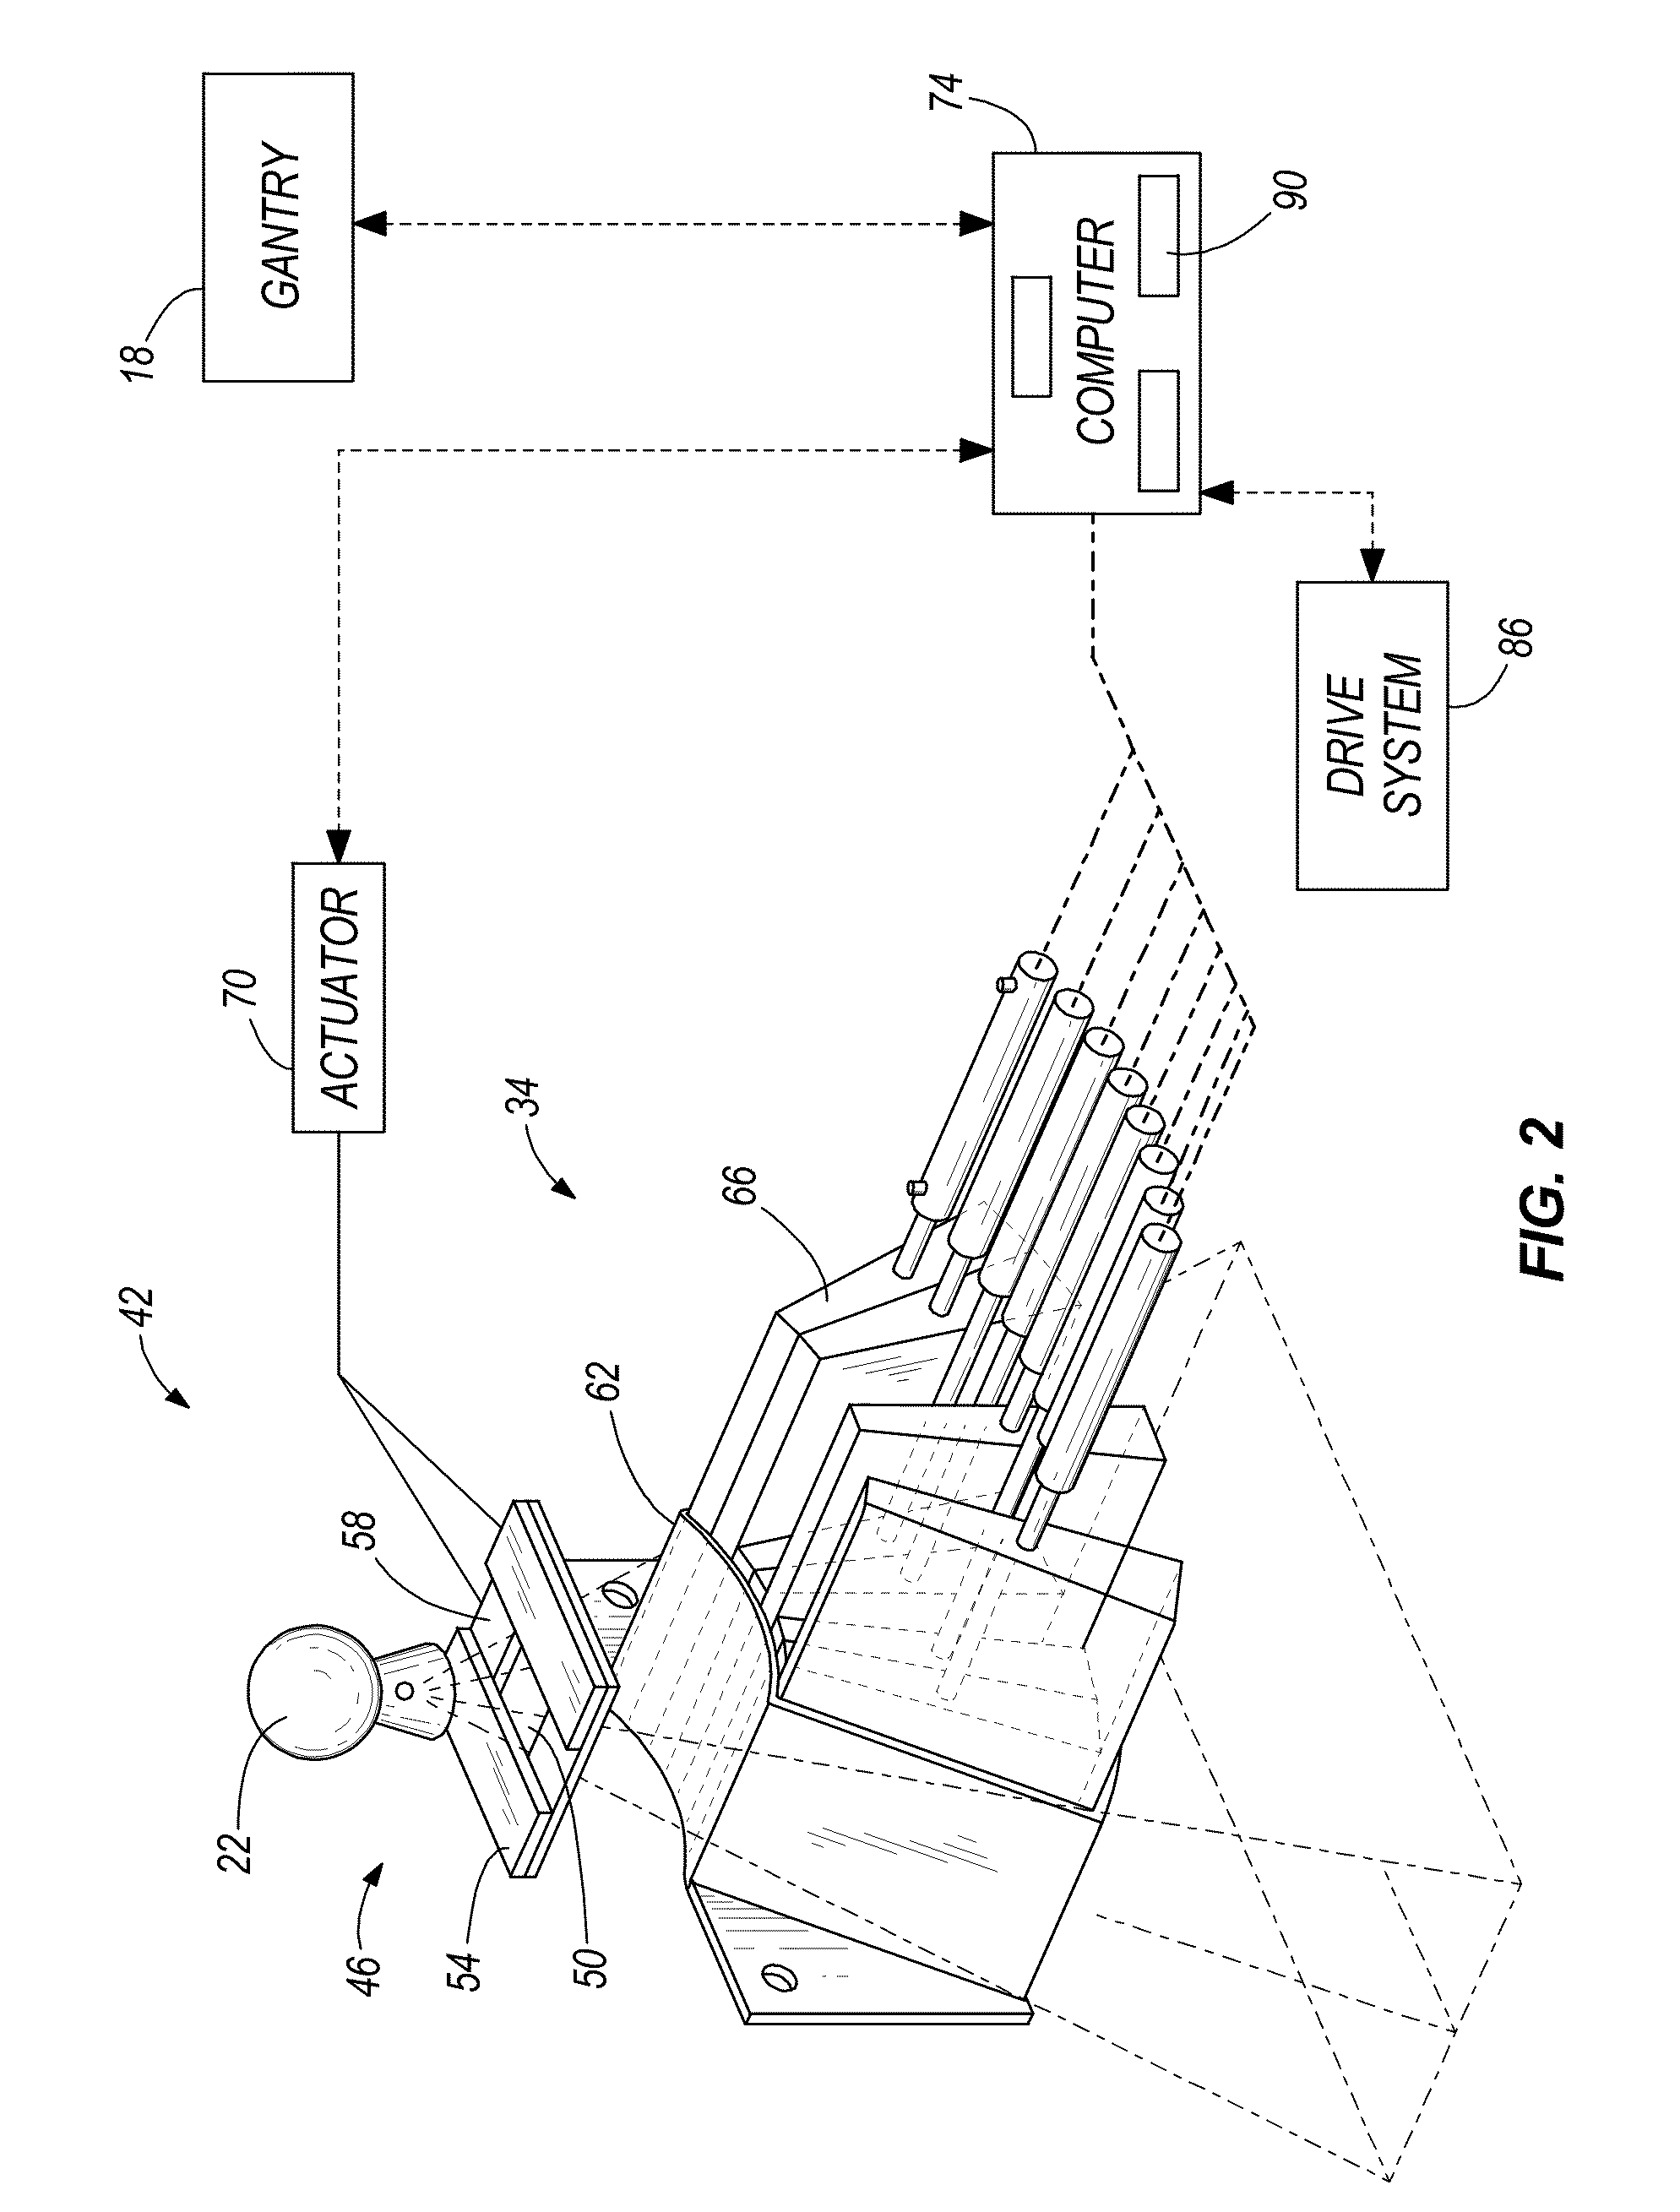 System and method of calculating dose uncertainty